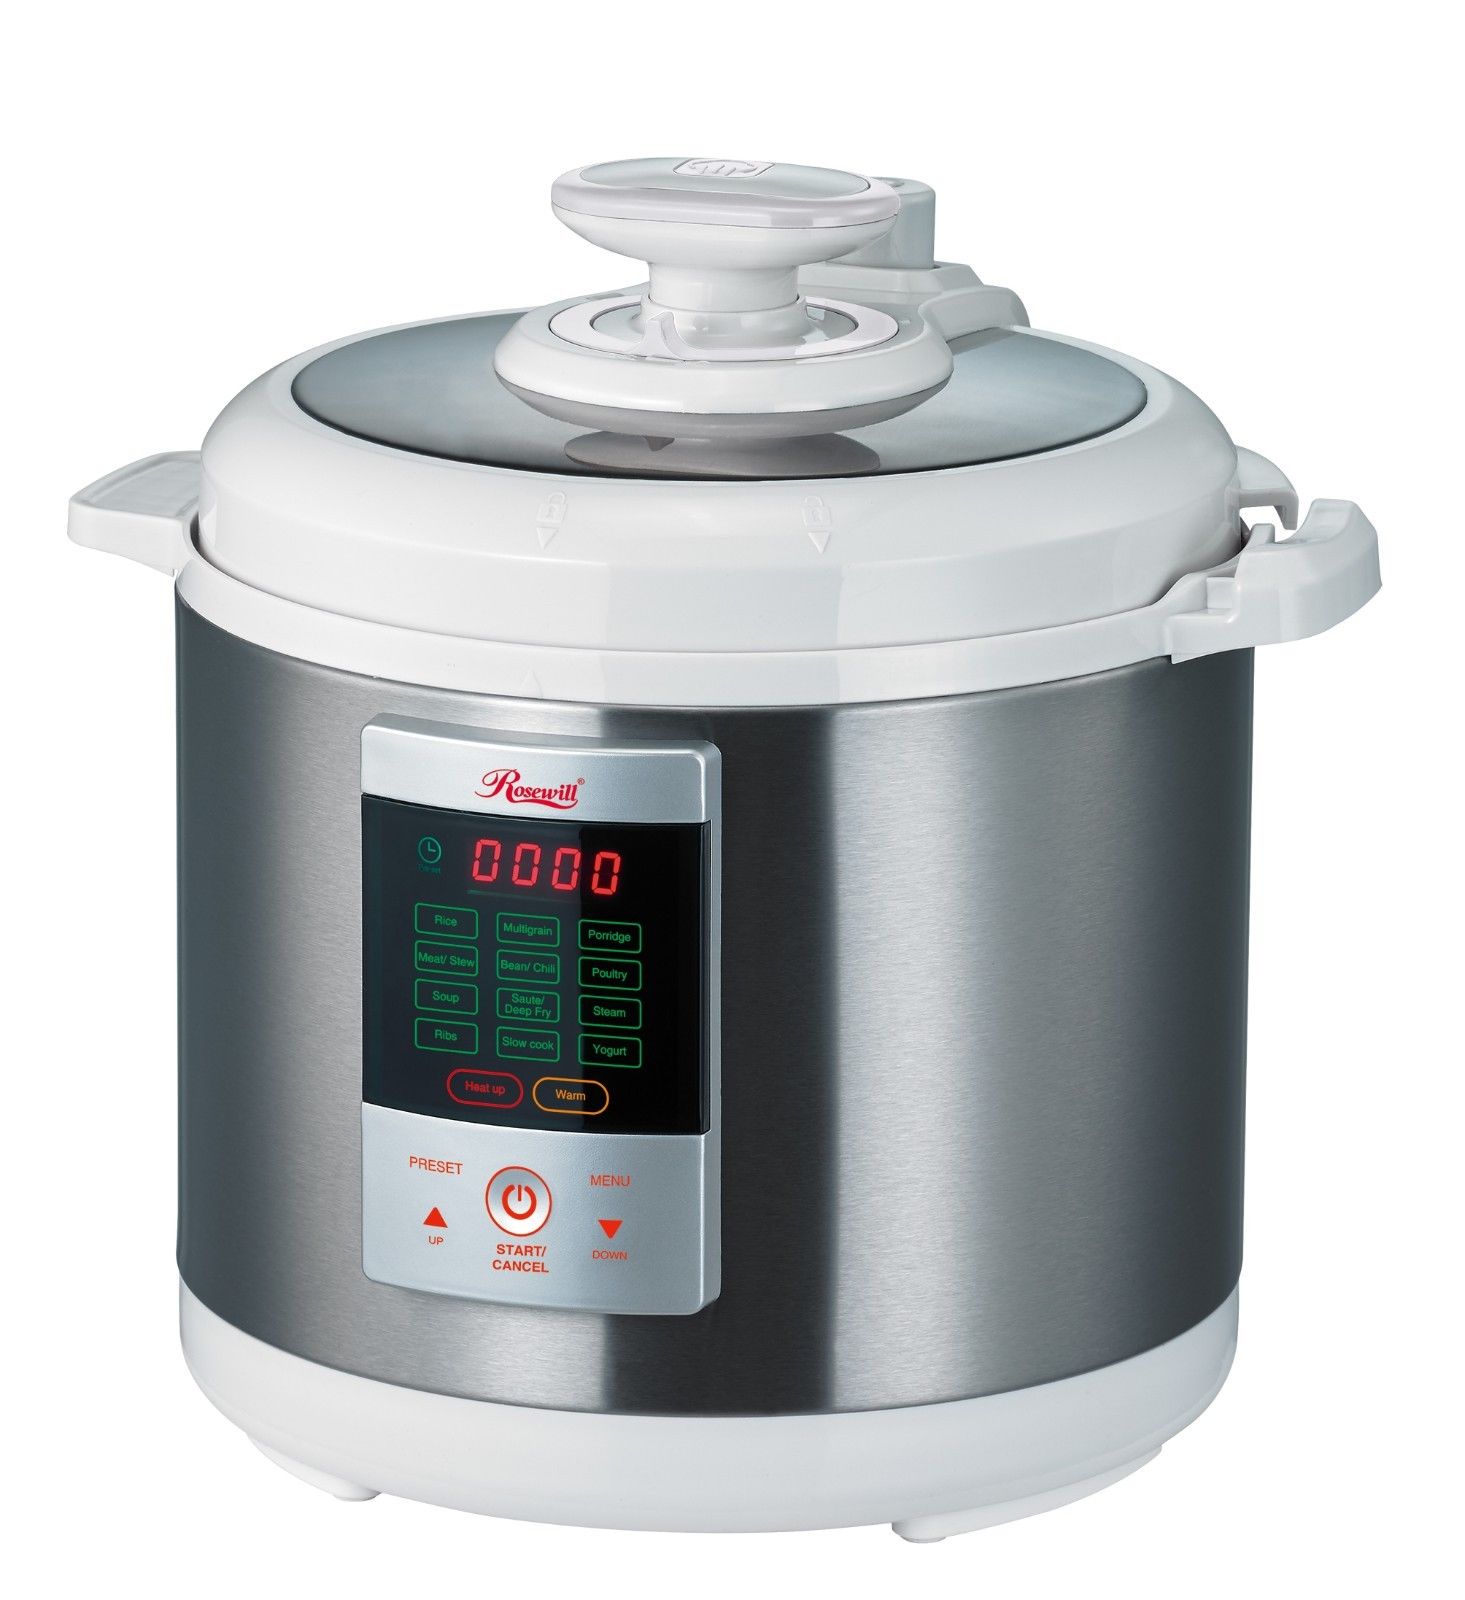 Rosewill 7-in-1 Programmable 6.3-qt Pressure Cooker Only $47.99!